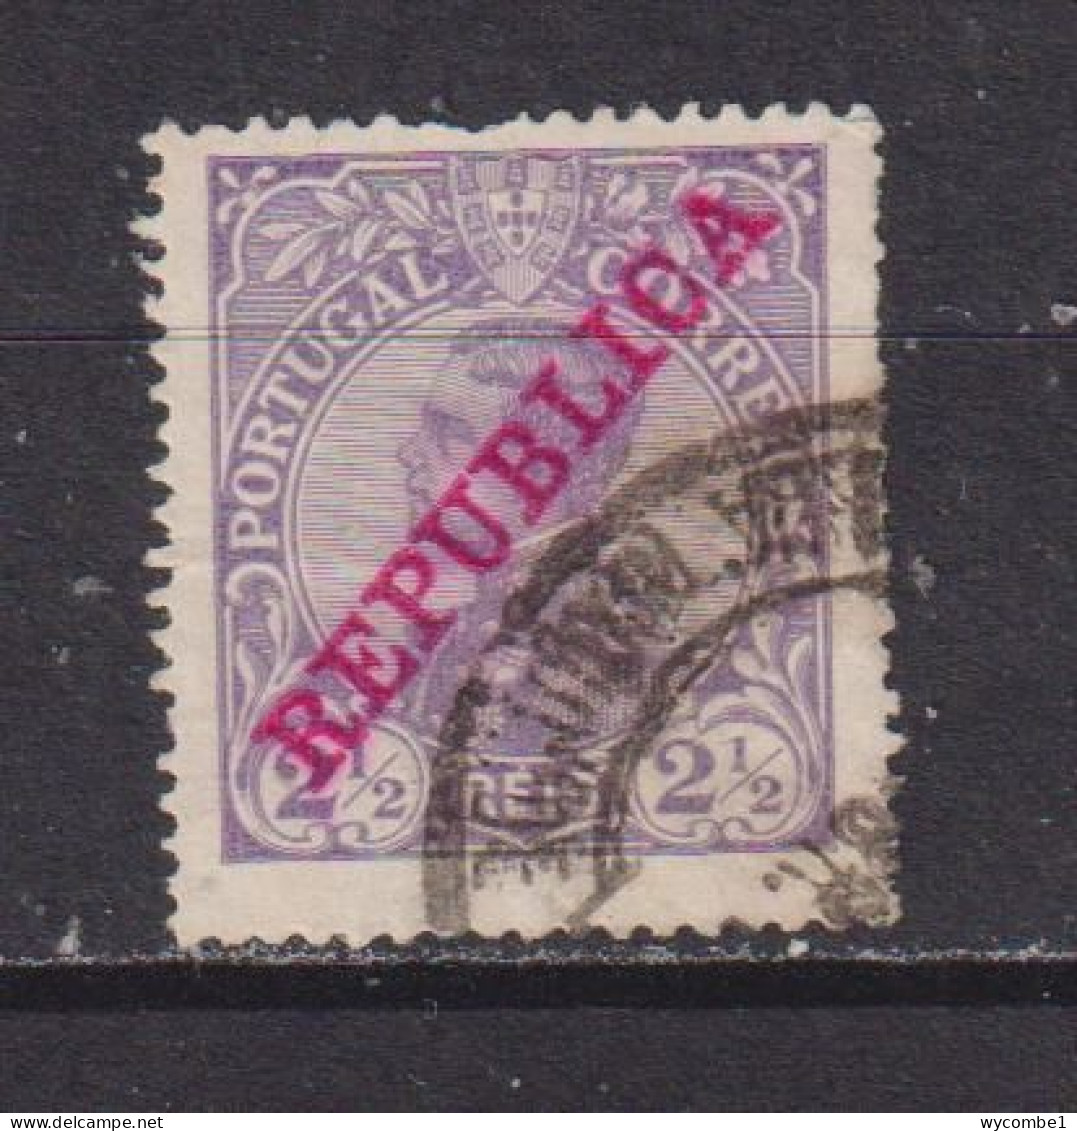 PORTUGAL - 1910 Republica  21/2r  Used As Scan - Used Stamps